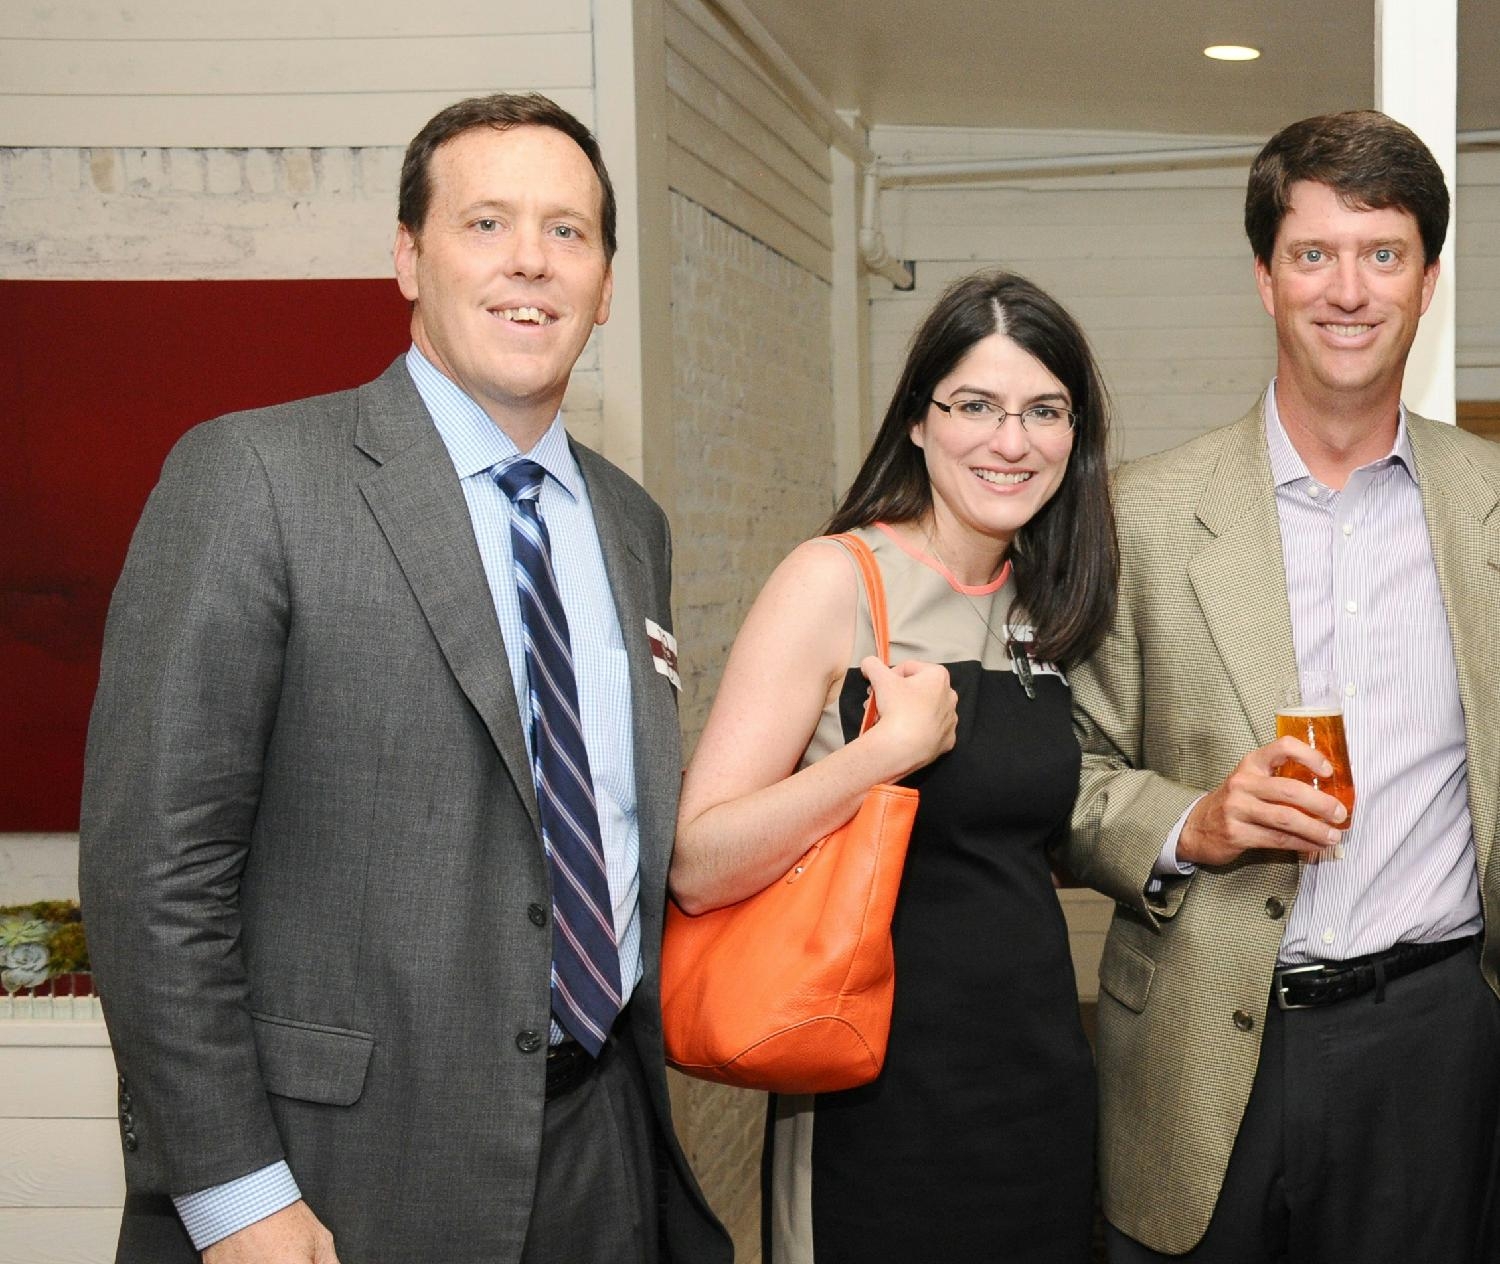 Two of our three founding partners, Dan Huff and Page Powell, and managing partner Anna Fretwell